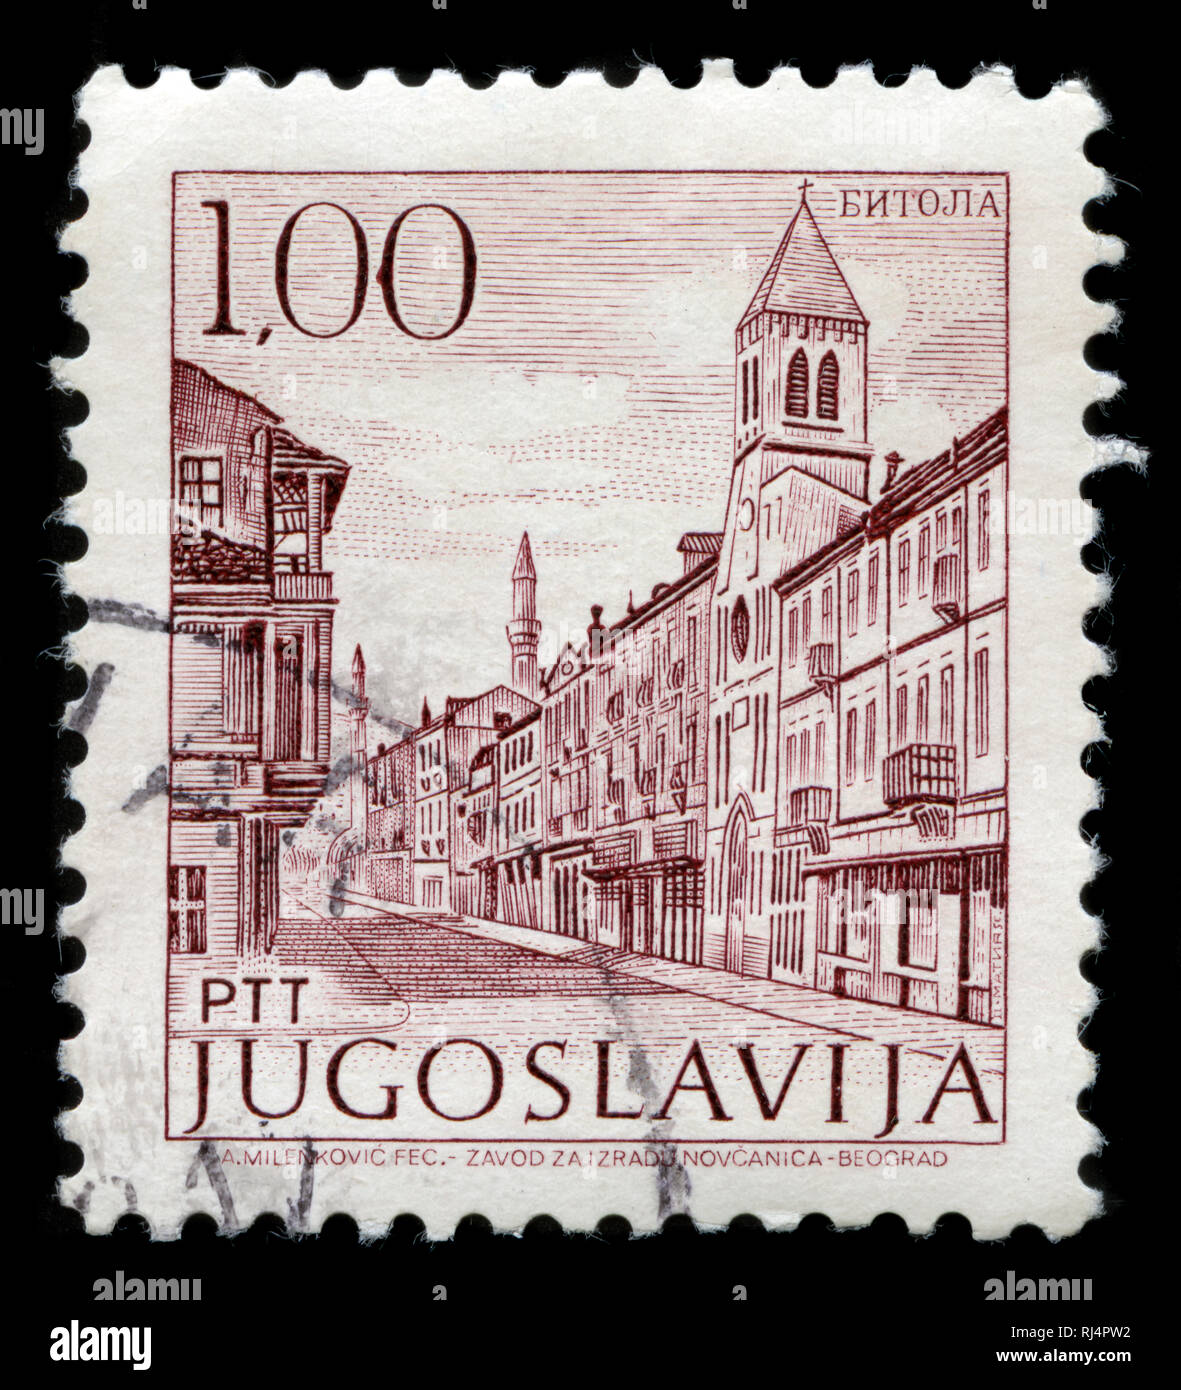 Postage stamp from the former state of Yugoslavia in the Tourism-Definitive Small series issued in 1971 Stock Photo